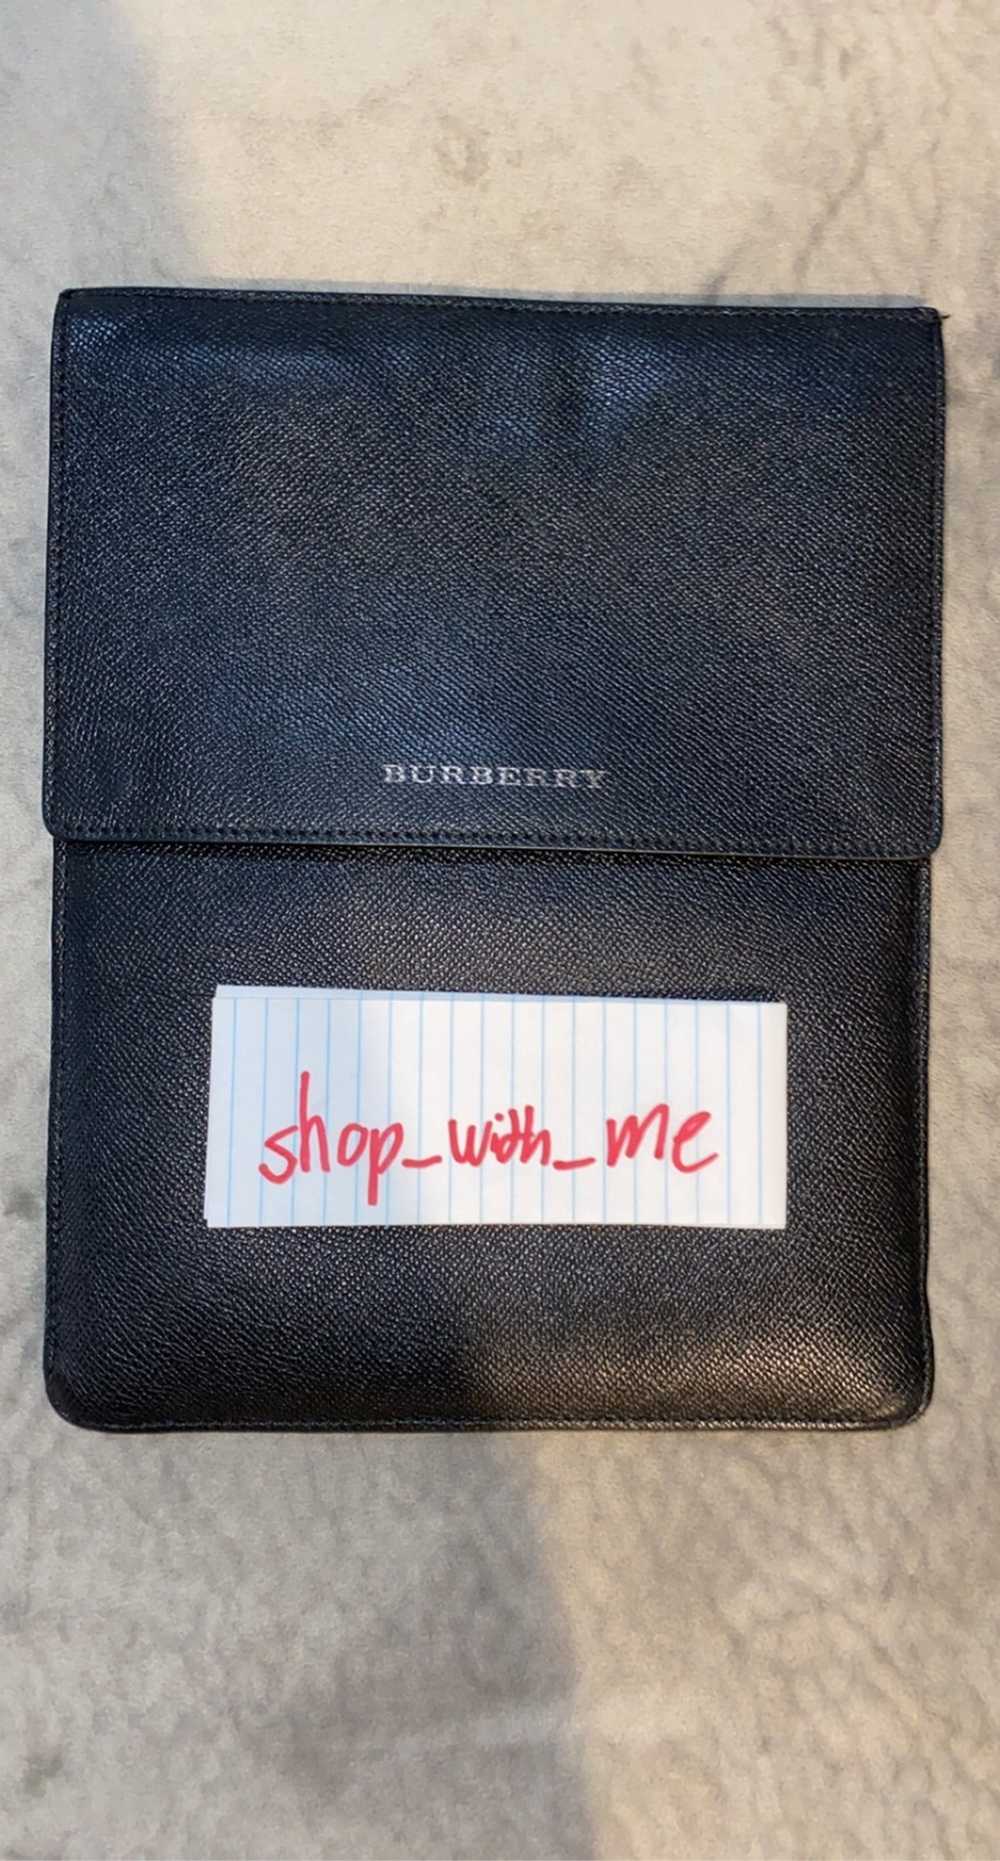 Burberry Burberry Leather Pouch - image 1